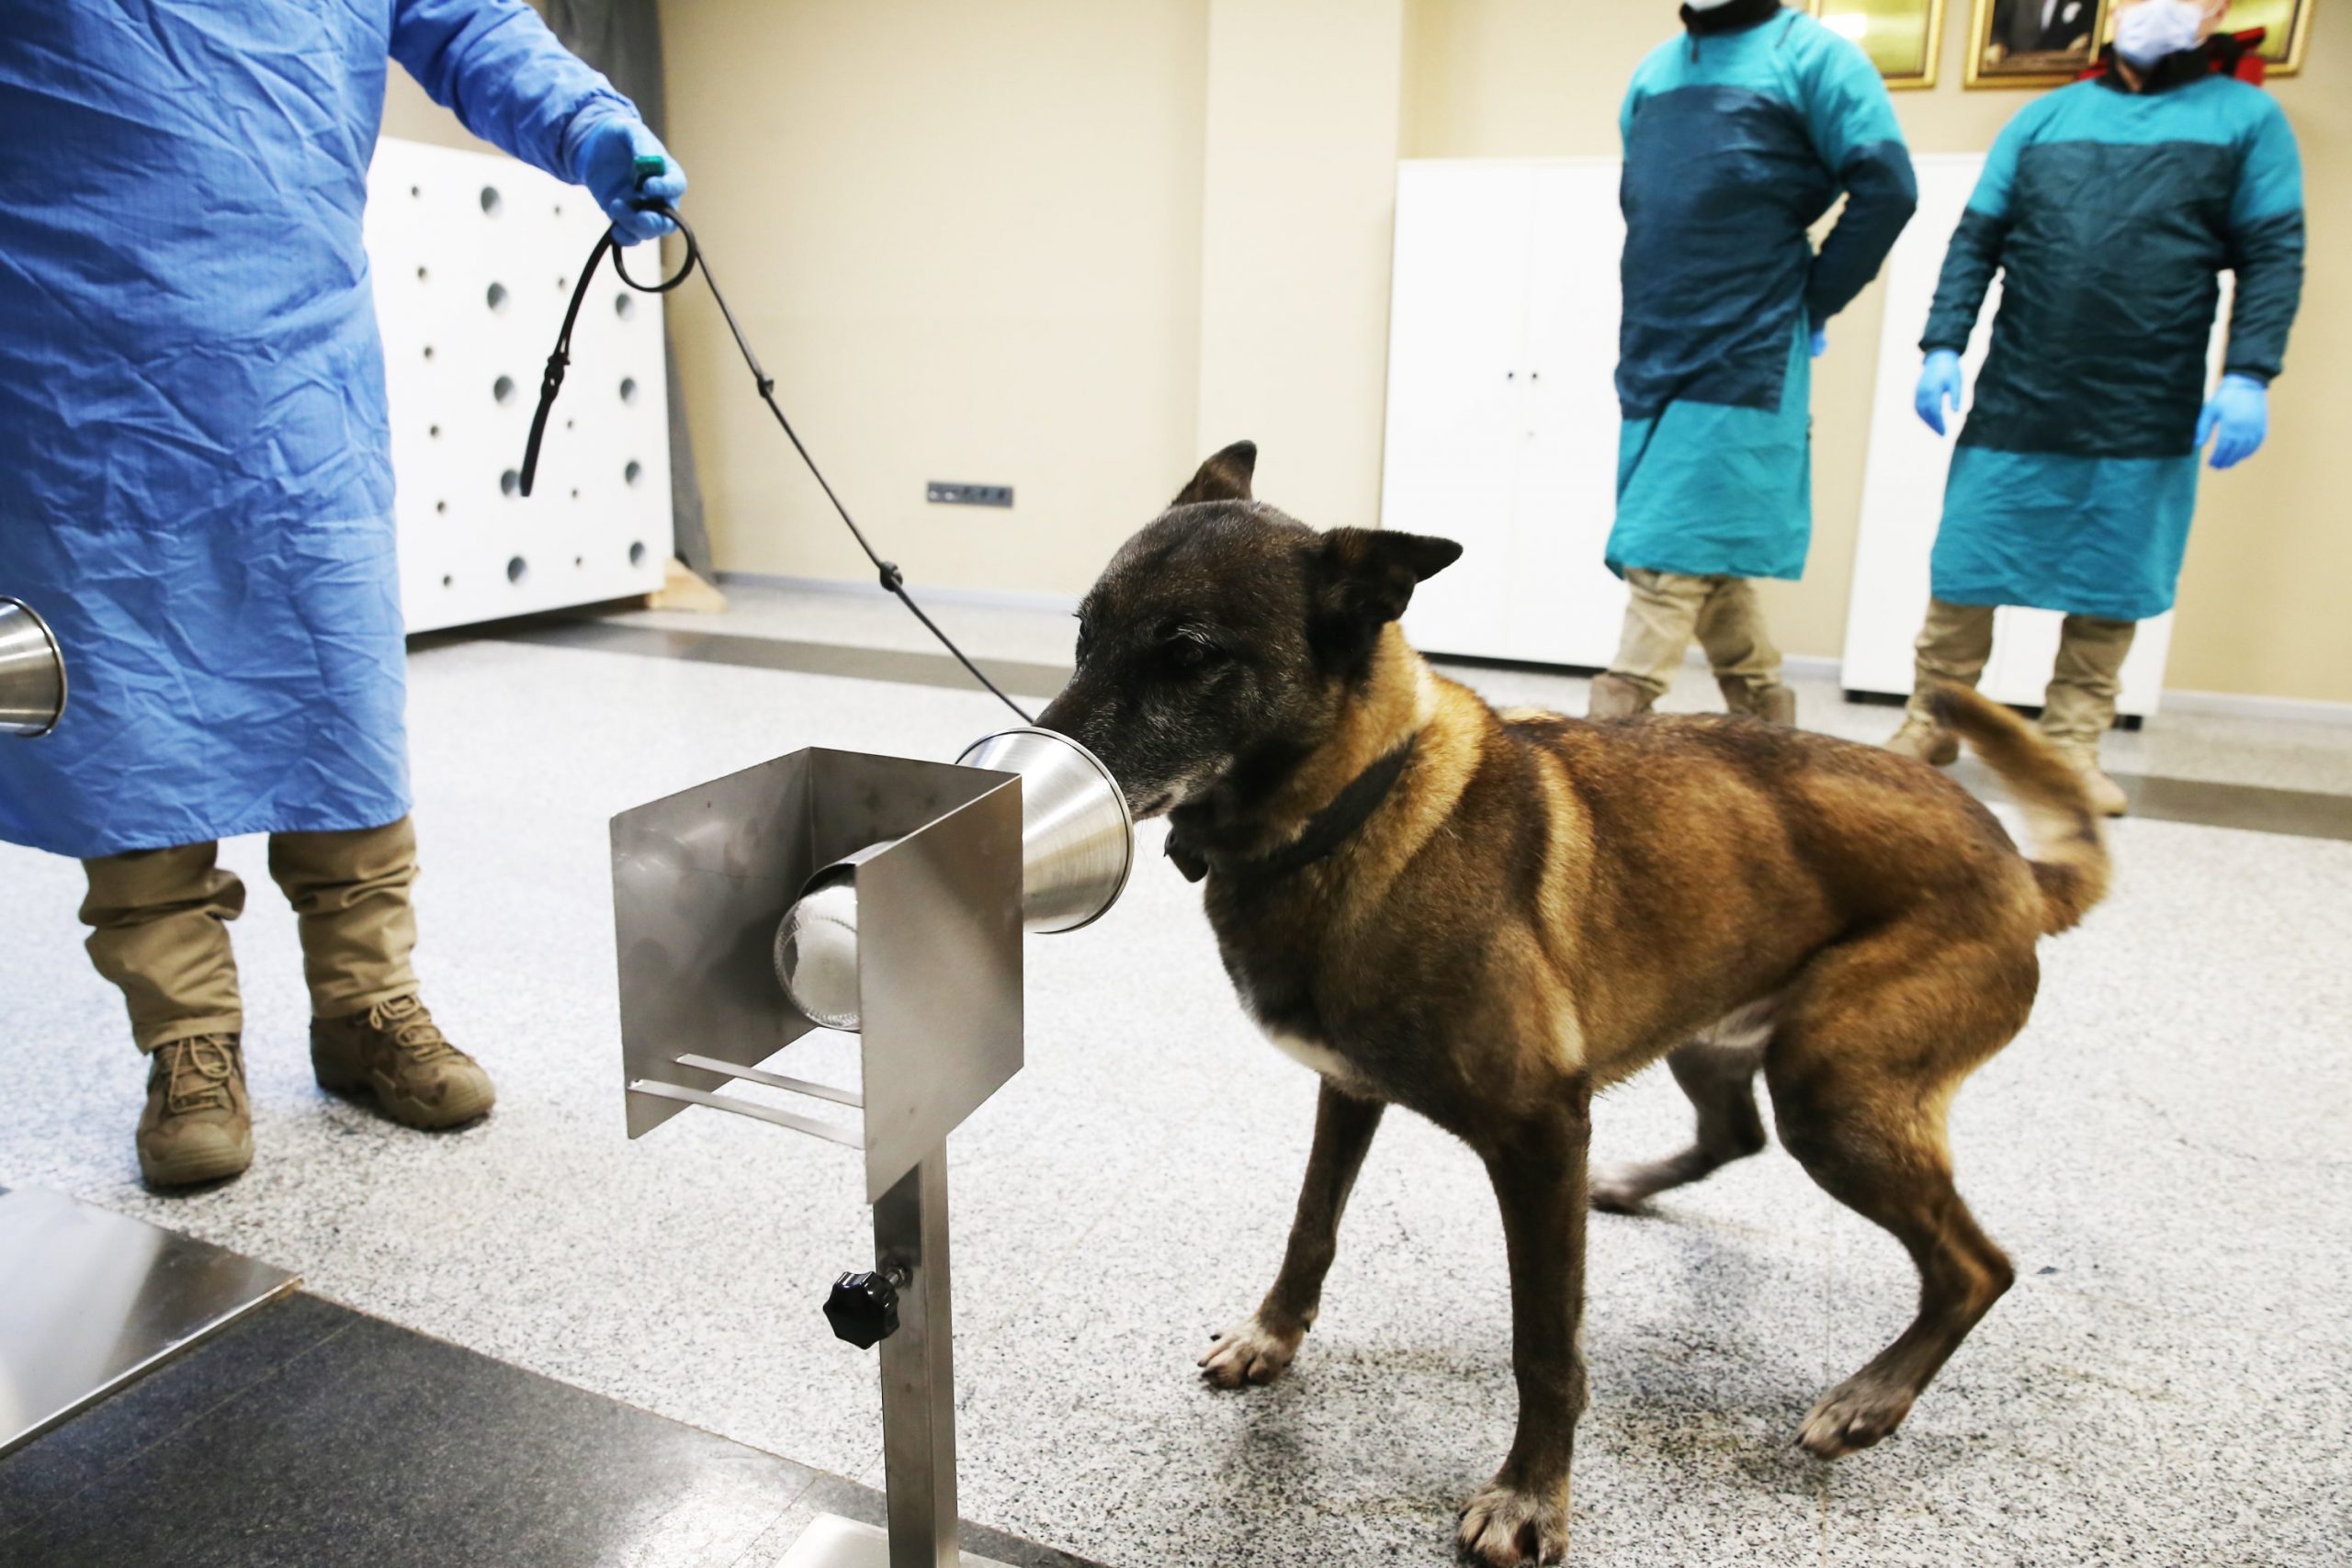 Sniffer dogs trained in Turkey to identify COVID-19 infected